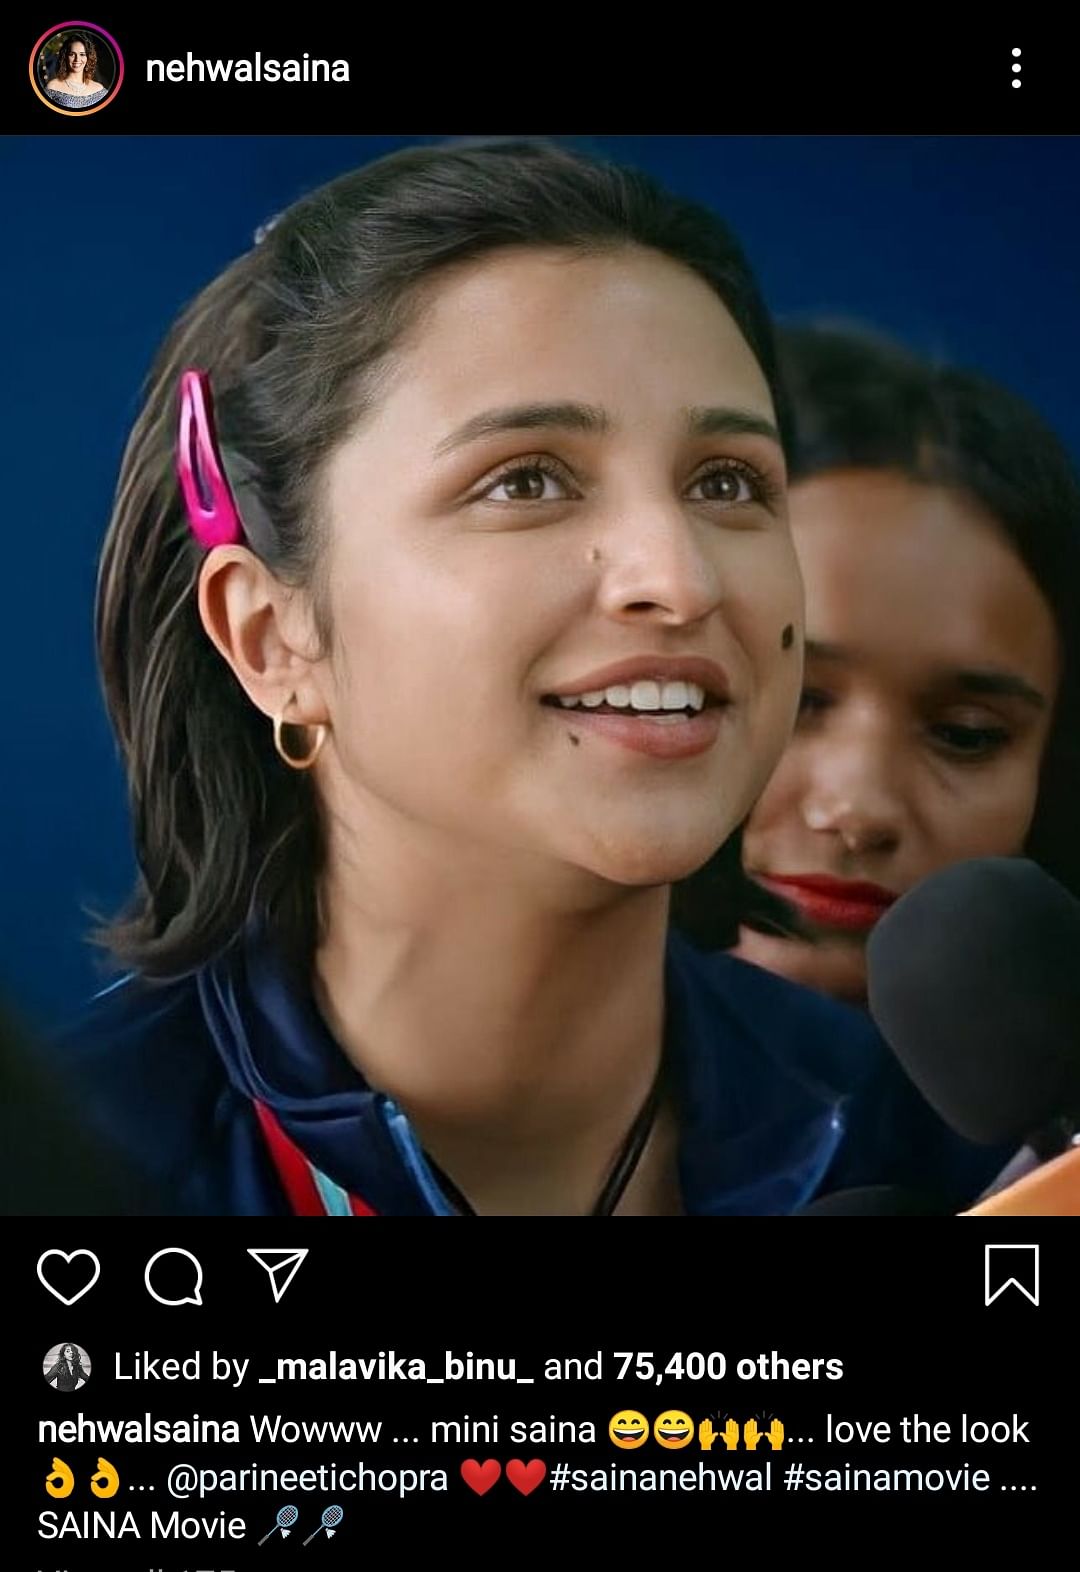 Saina shared a picture of Parineeti’s look from the film on social media.